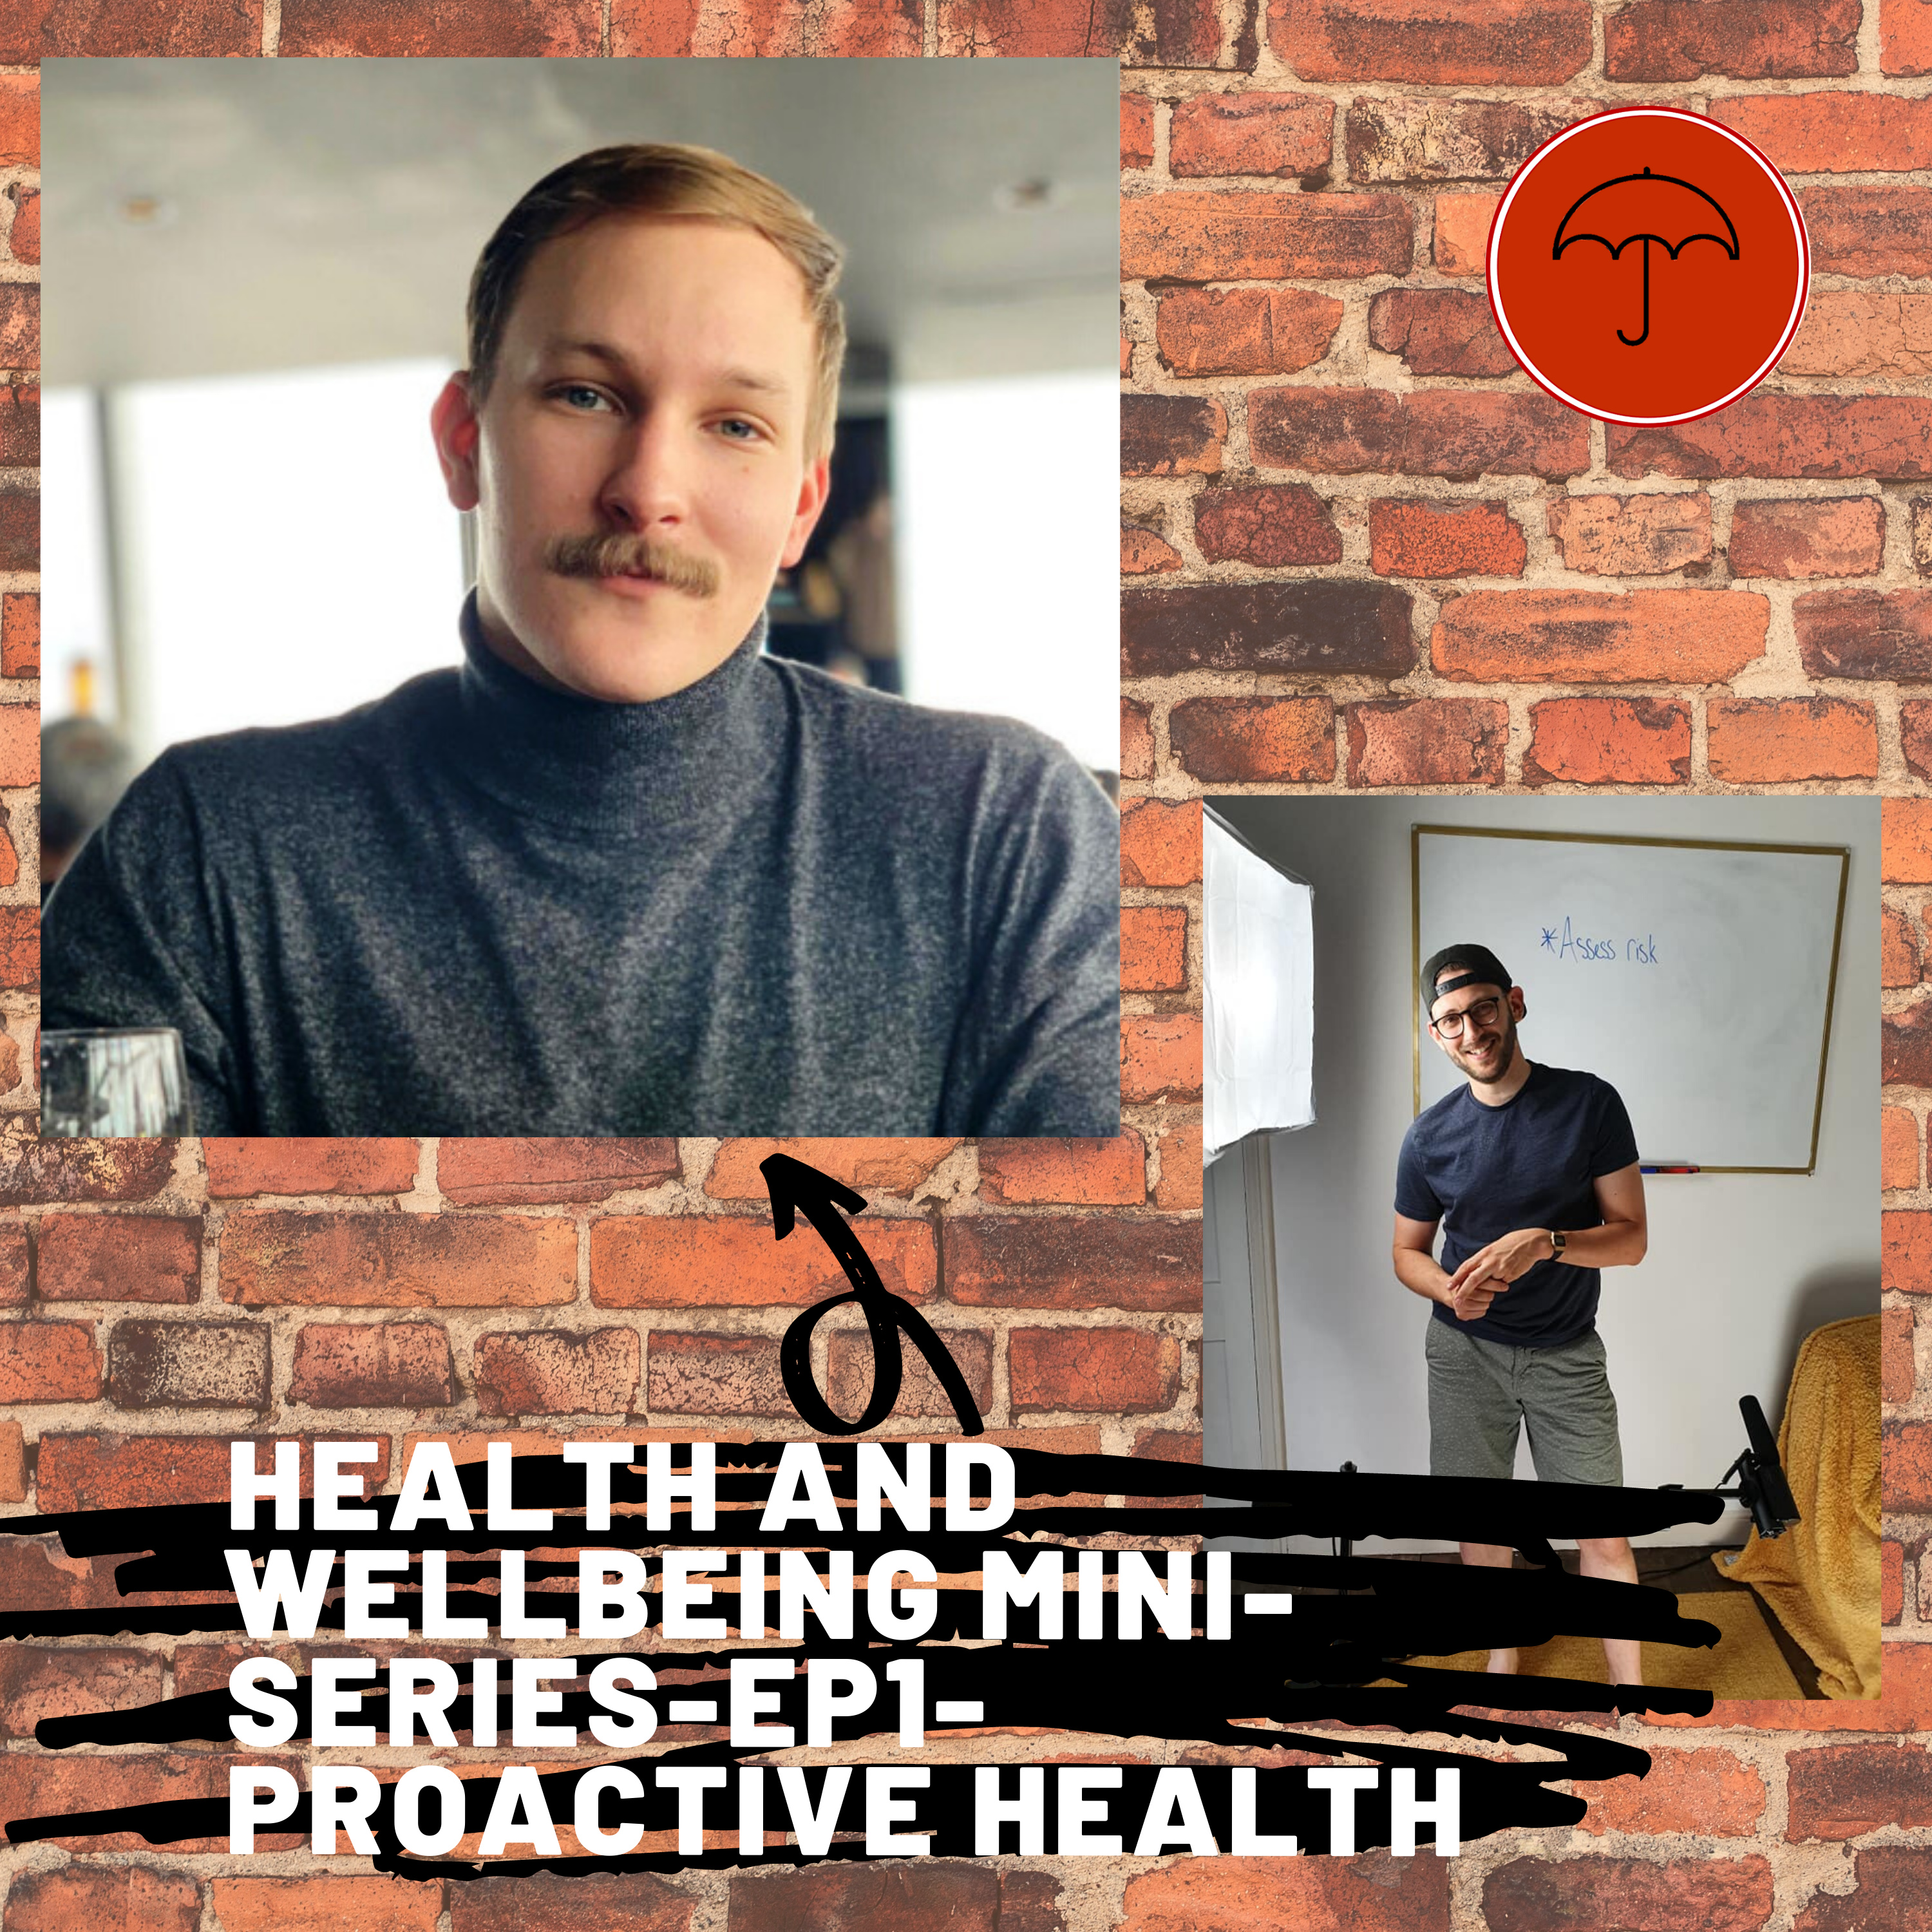 Health and Well being Mini Series- Proactive health with Konsta Ep73